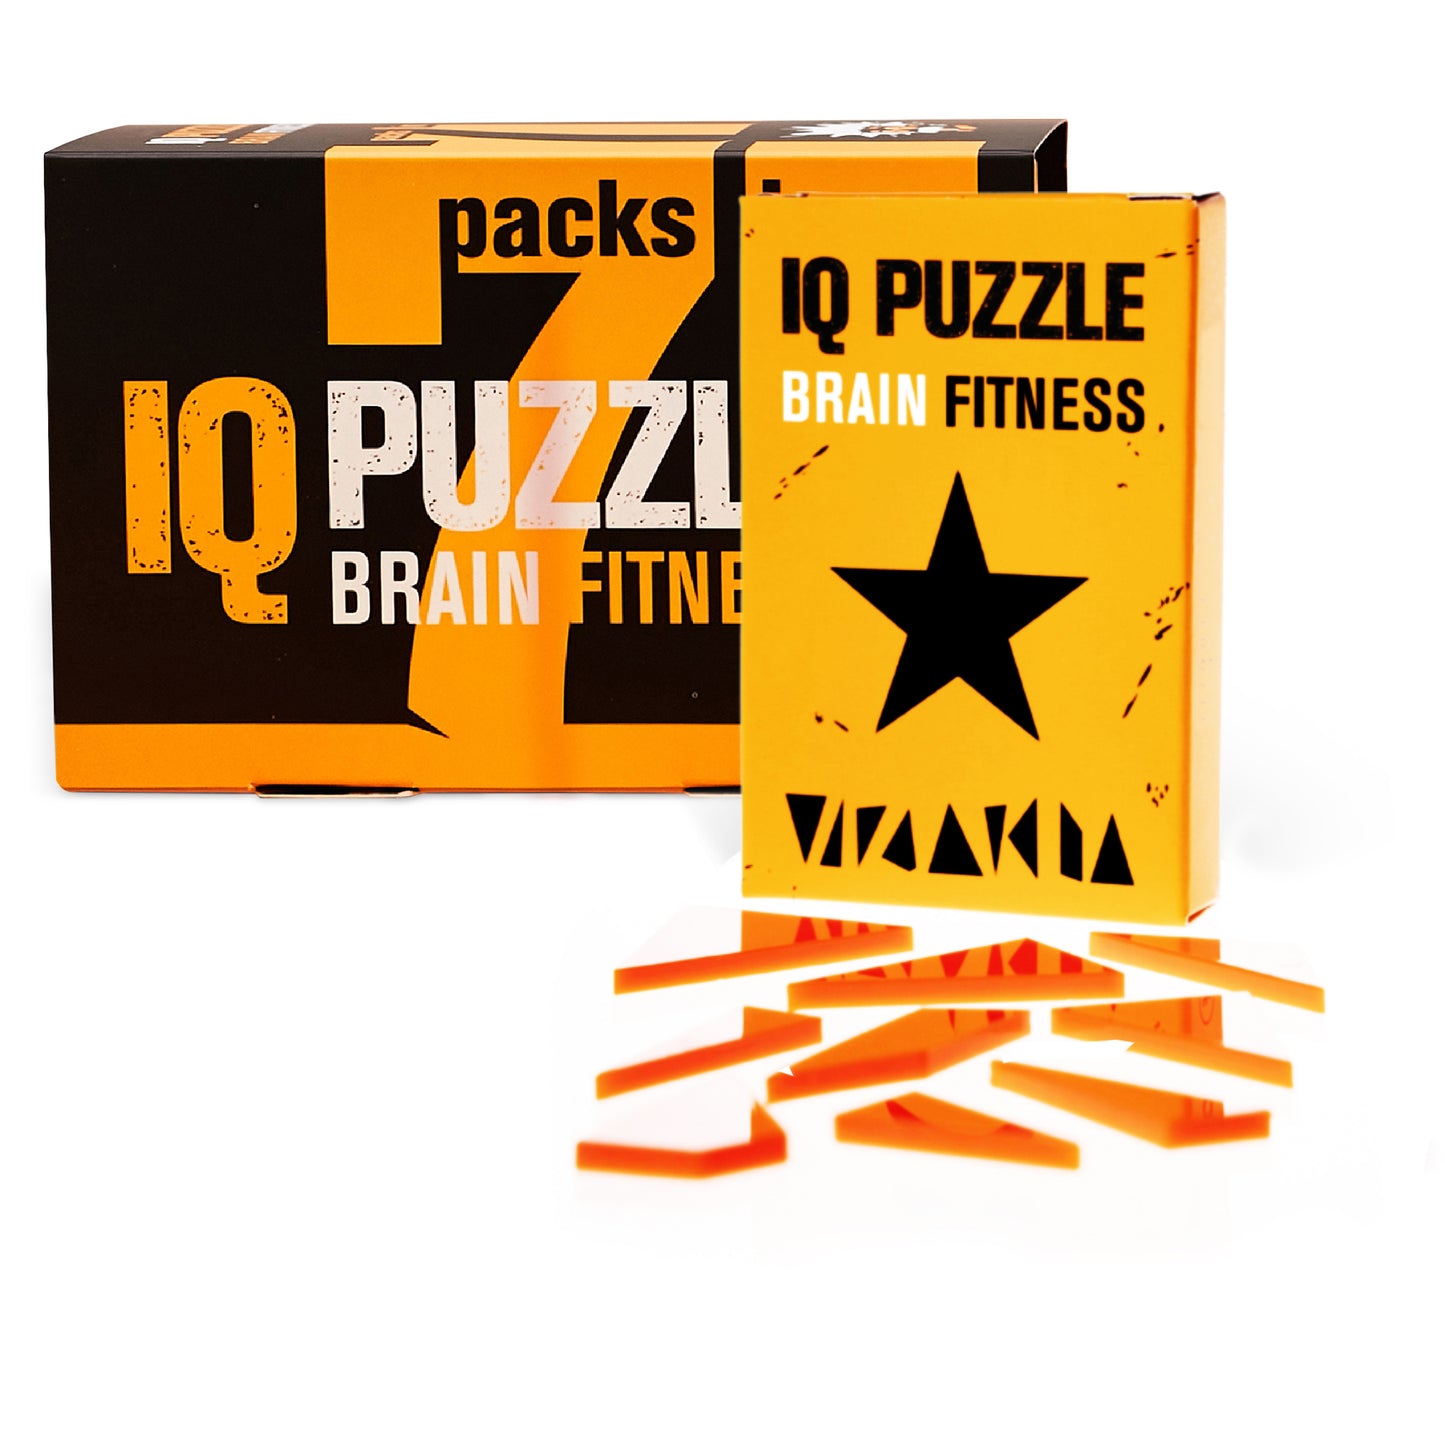 IQ Puzzle Set of 7 - Mix of Themes (Coffee, Circle, Triangle, Pyramid, Star, Twins, Dollar)